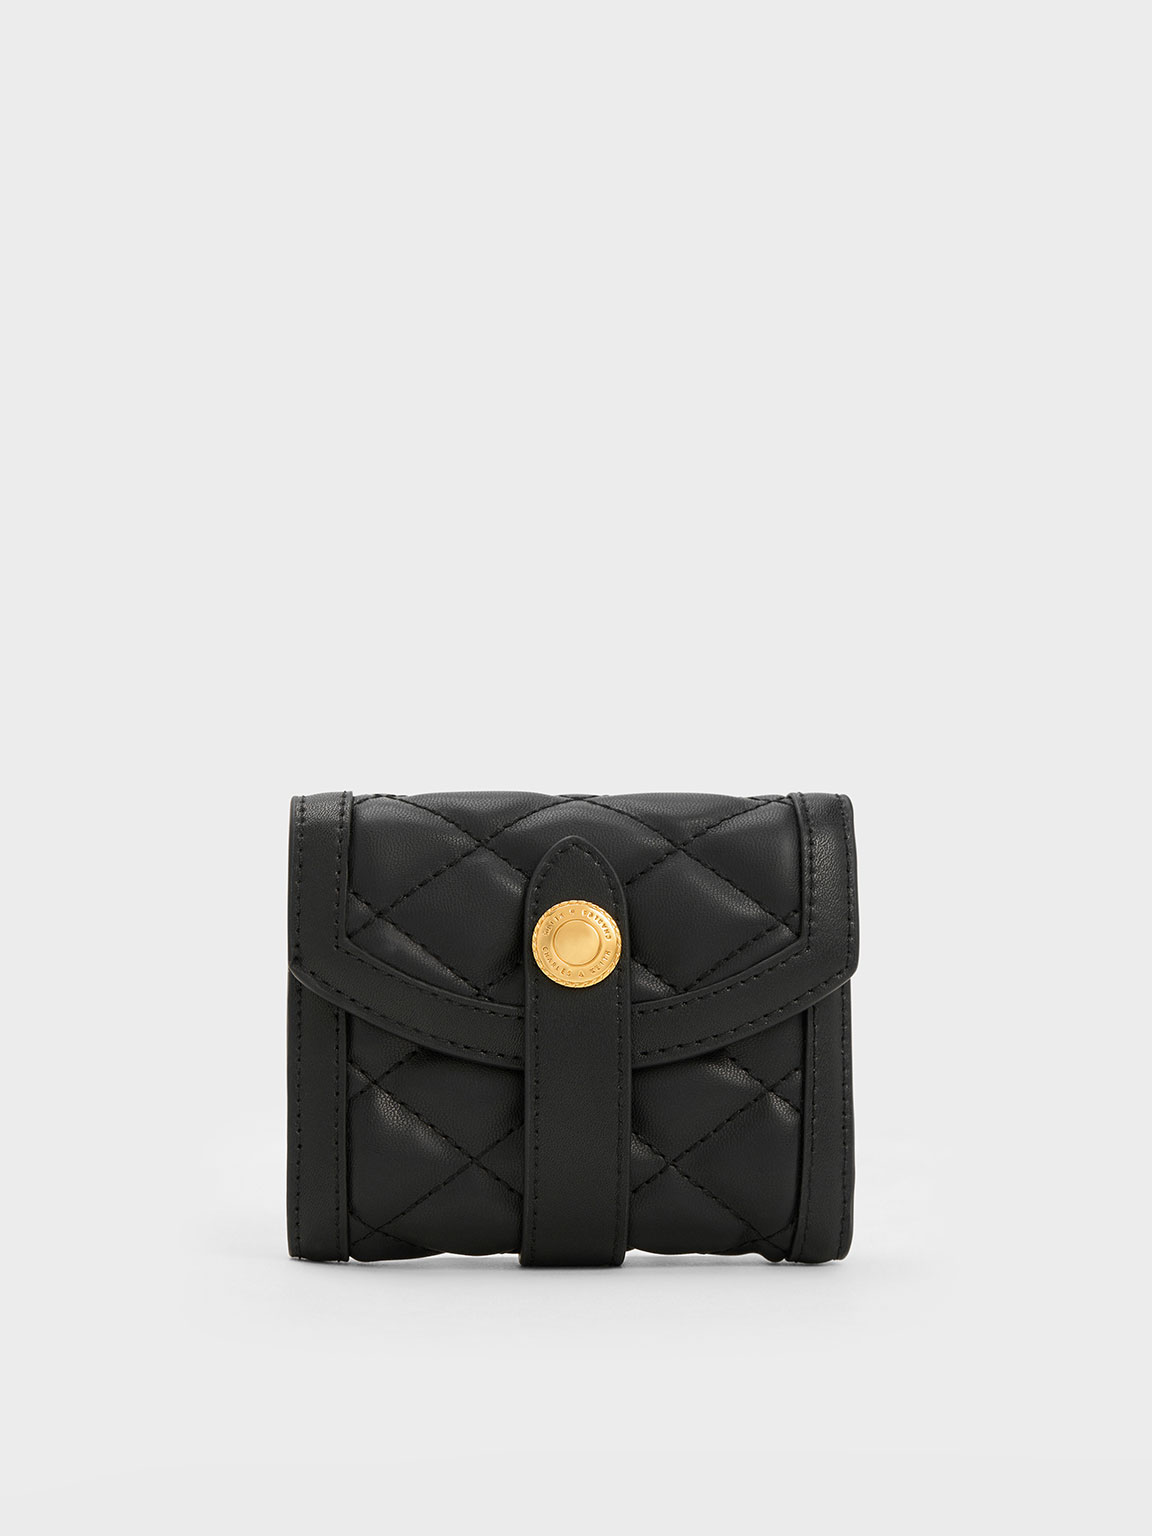 KC JAGGER QUILTED LEATHER ZIP AROUND WALLET - BLACK